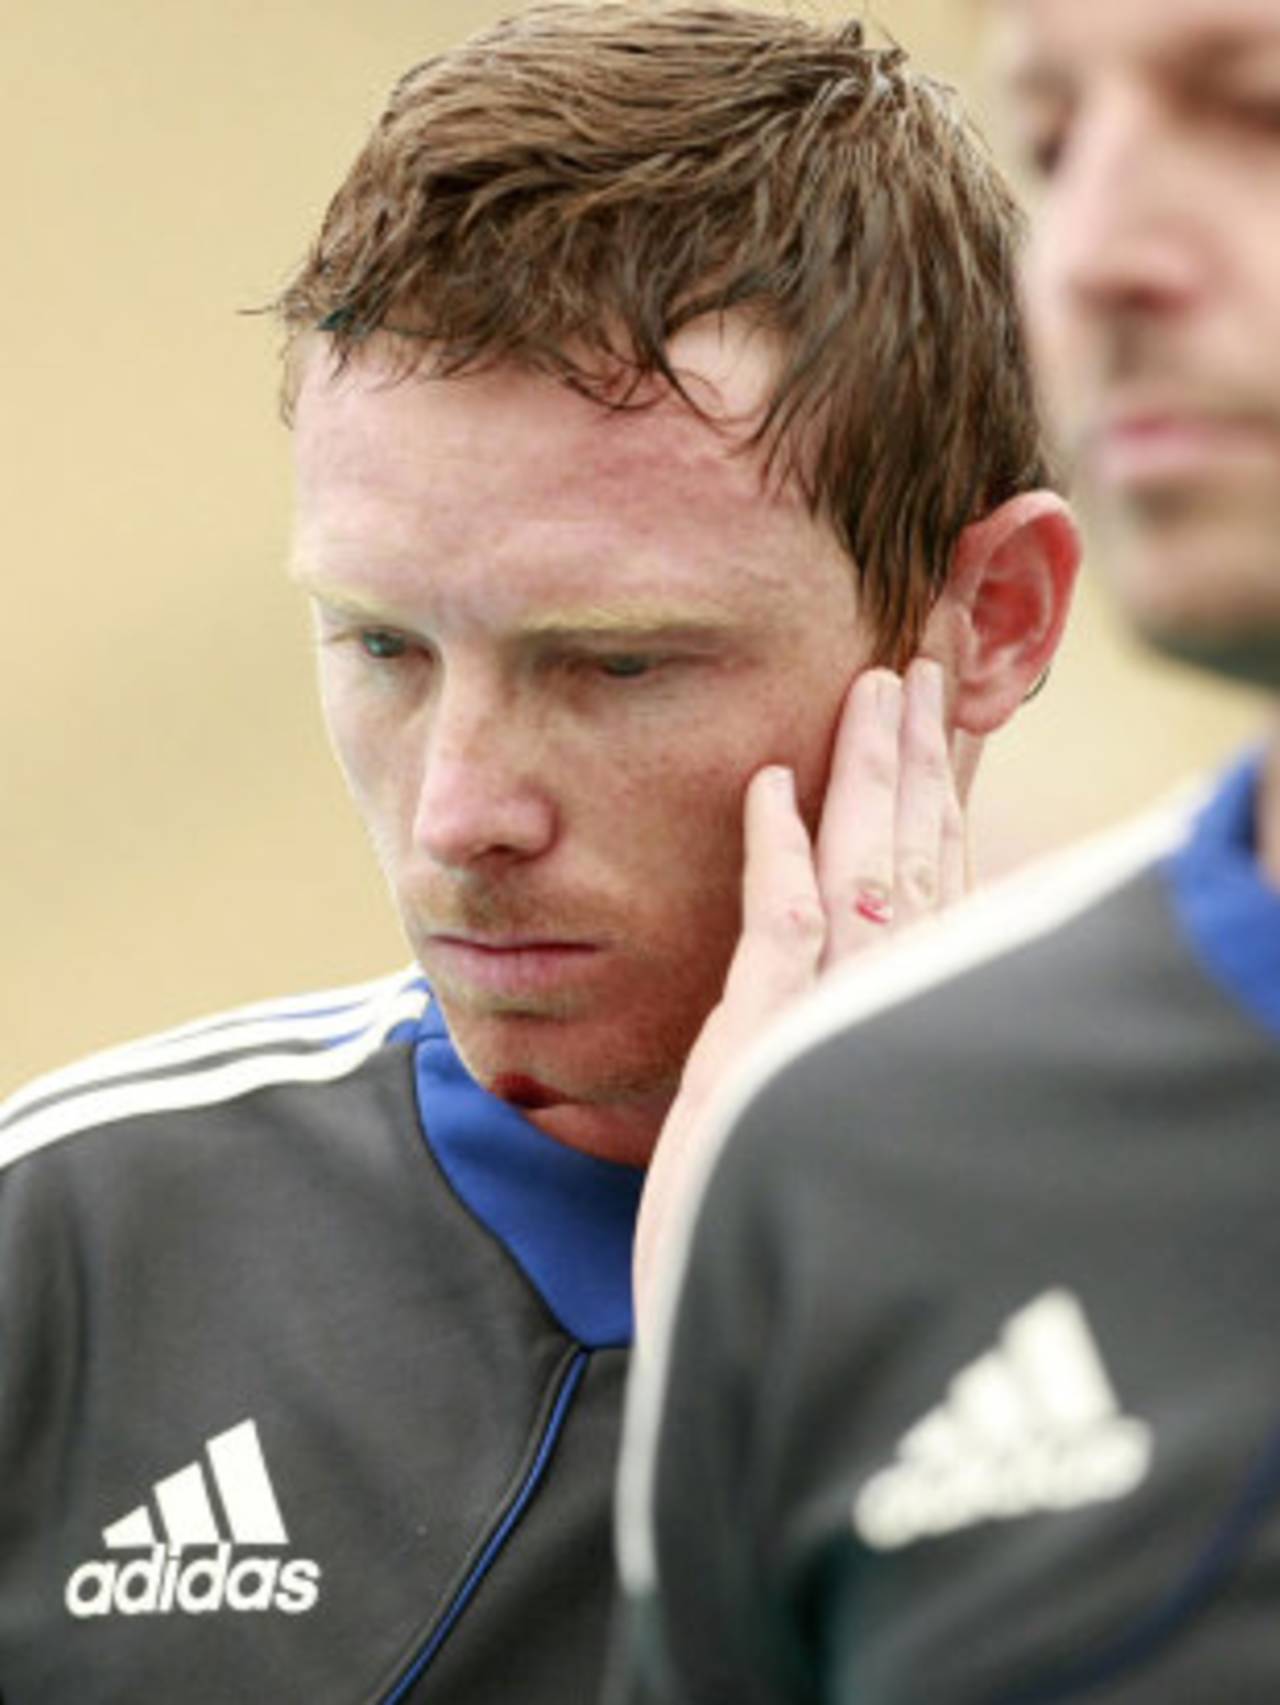 Ian Bell emerged from the nets nursing a bloody chin, West End, June, 15, 2012